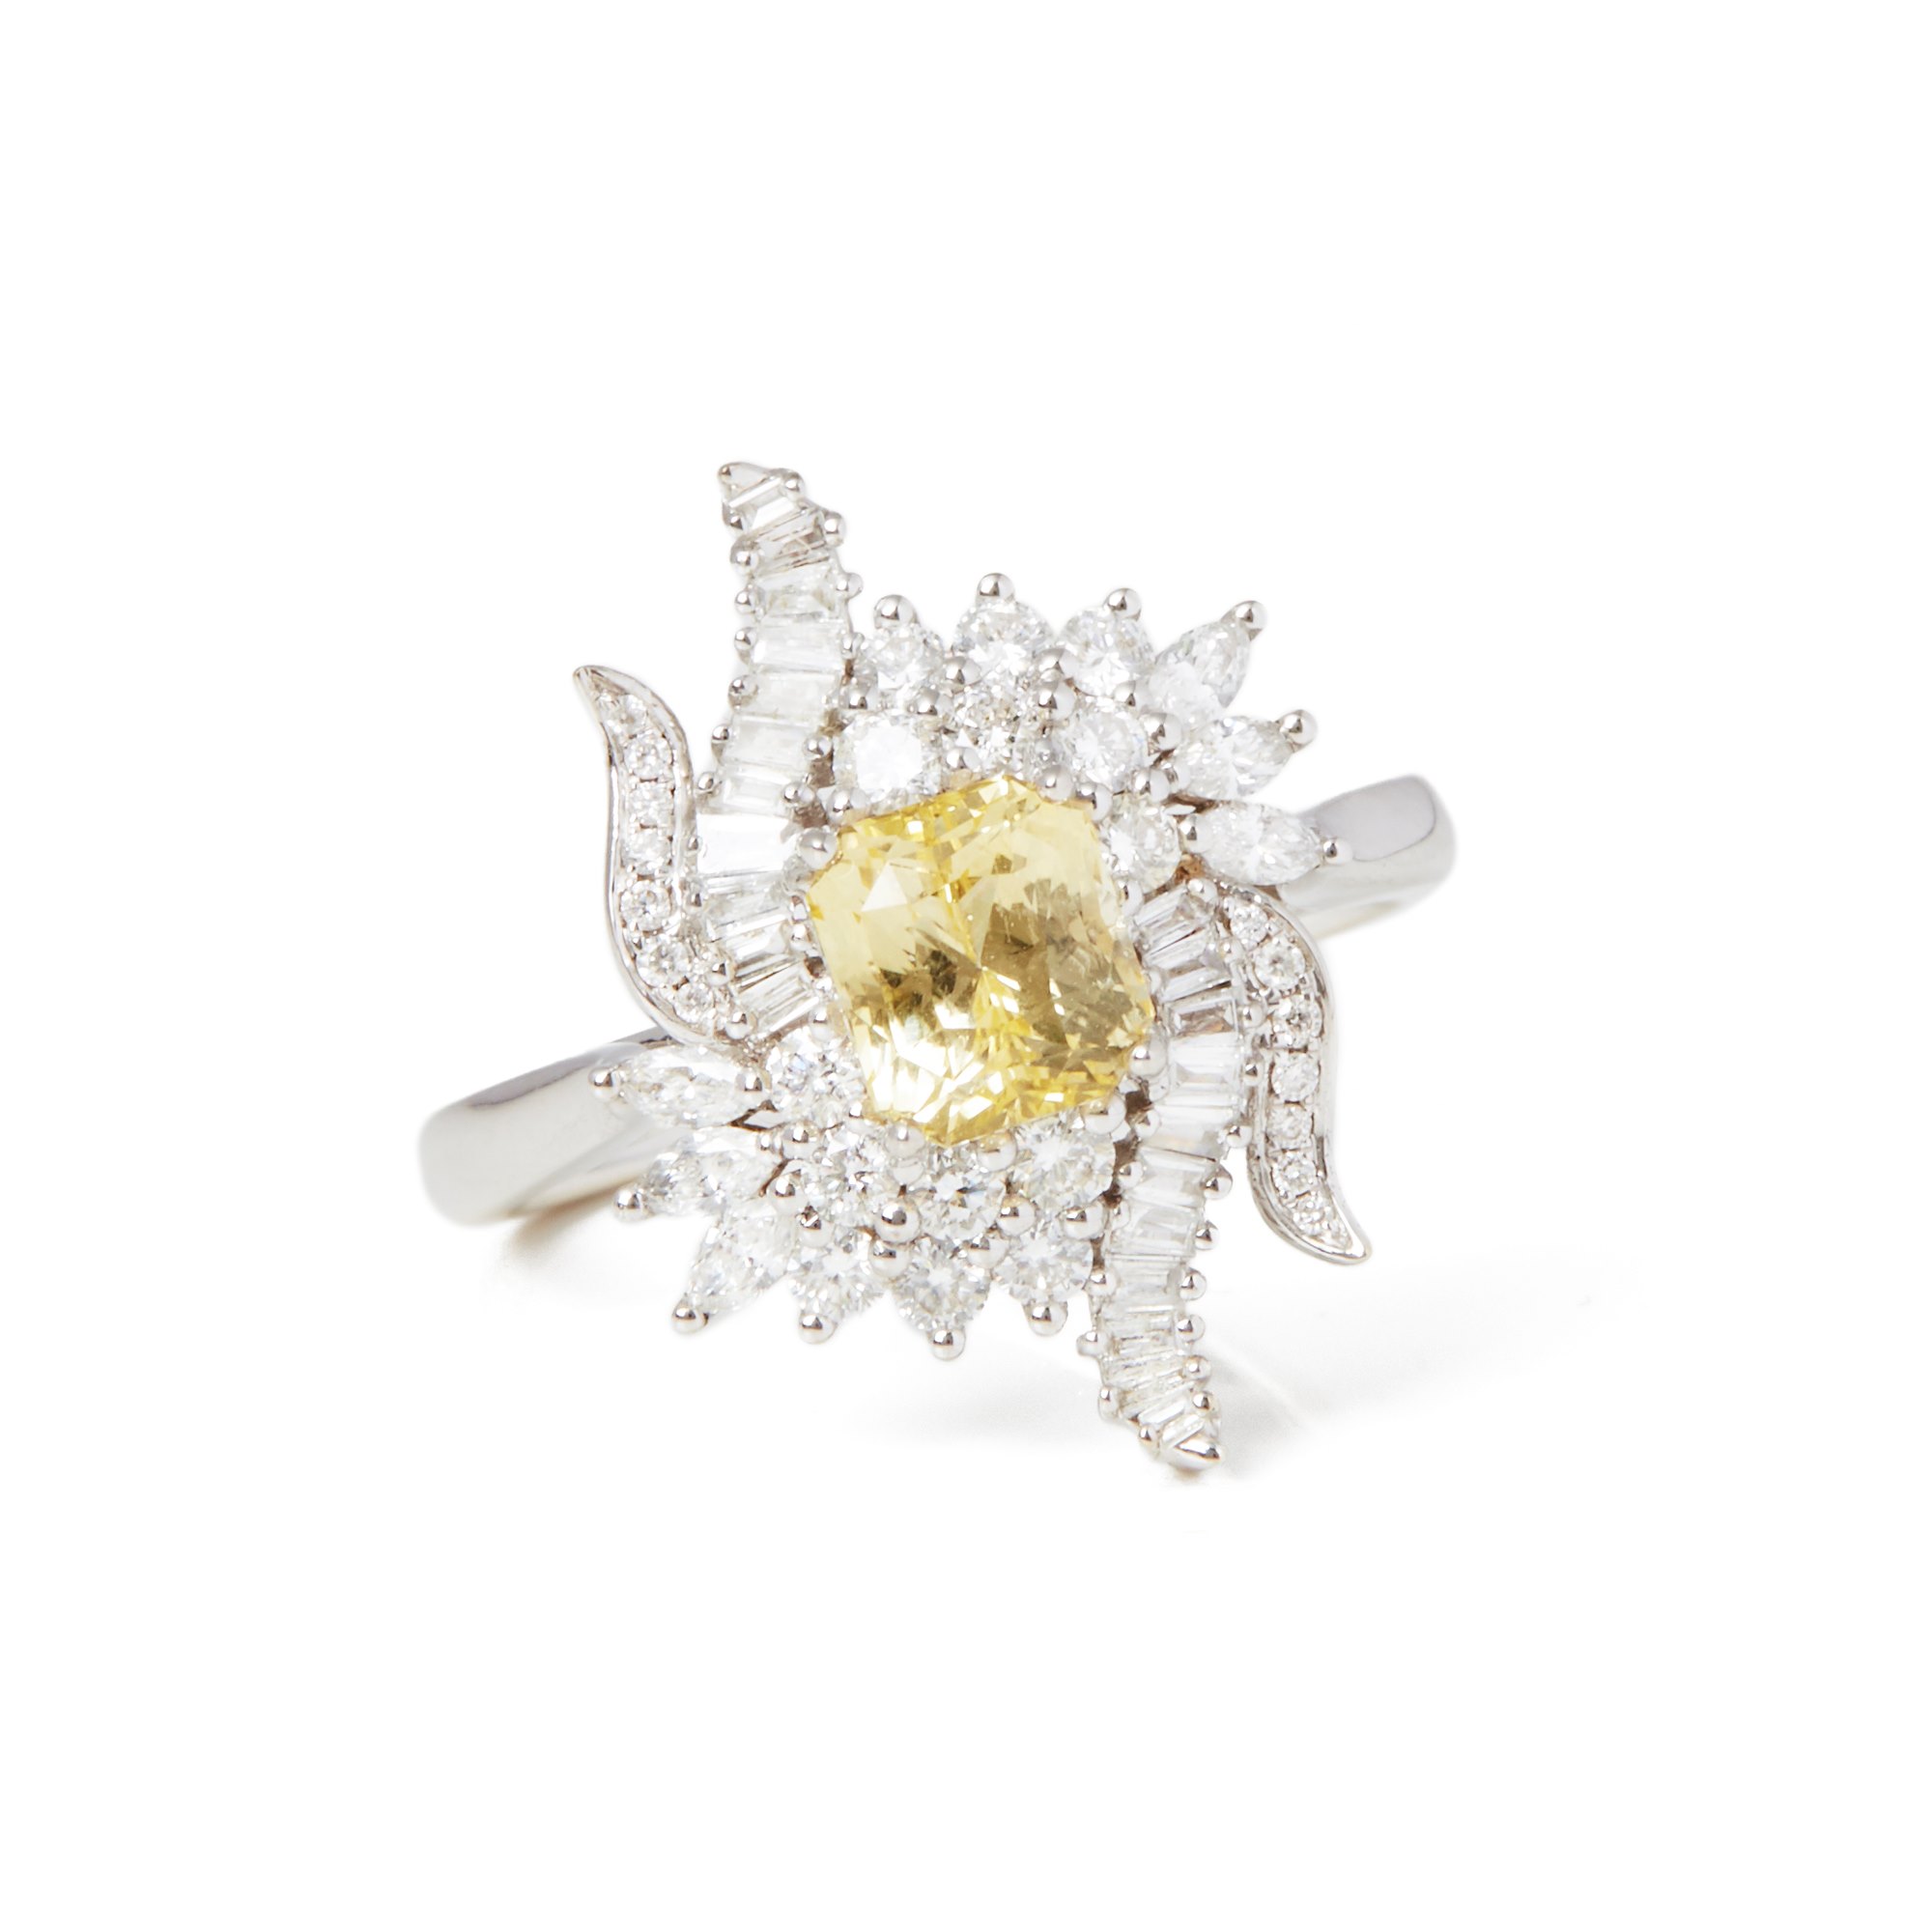 David Jerome Certified 1.57ct Octagon Cut Unheated Yellow Sapphire and Diamond 18ct Gold Ring